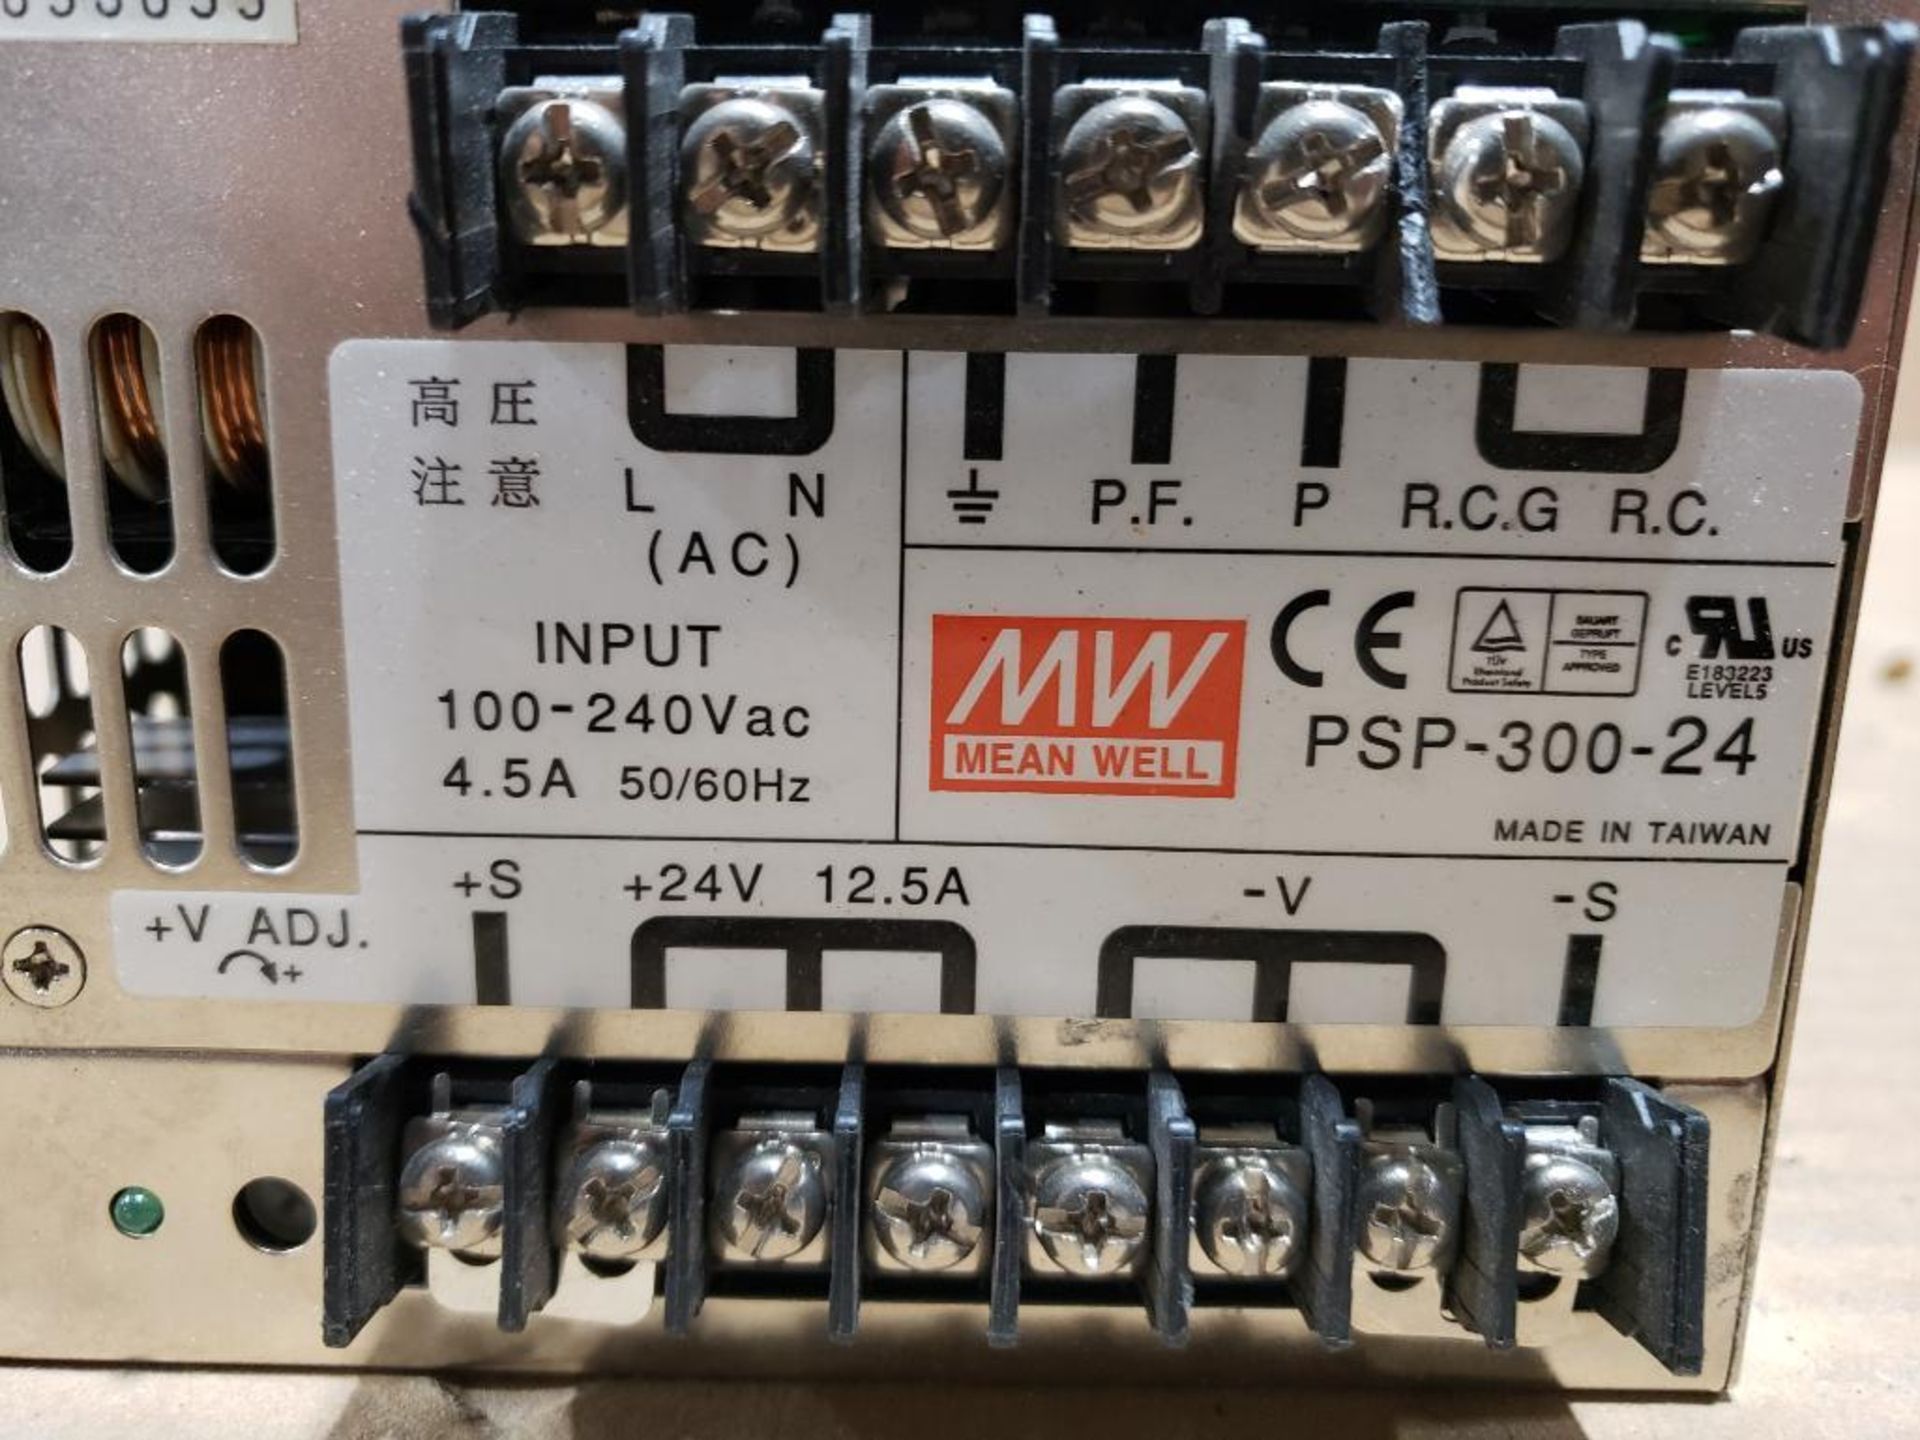 Mean Well power supply. Part number PSP-300-24. - Image 2 of 5